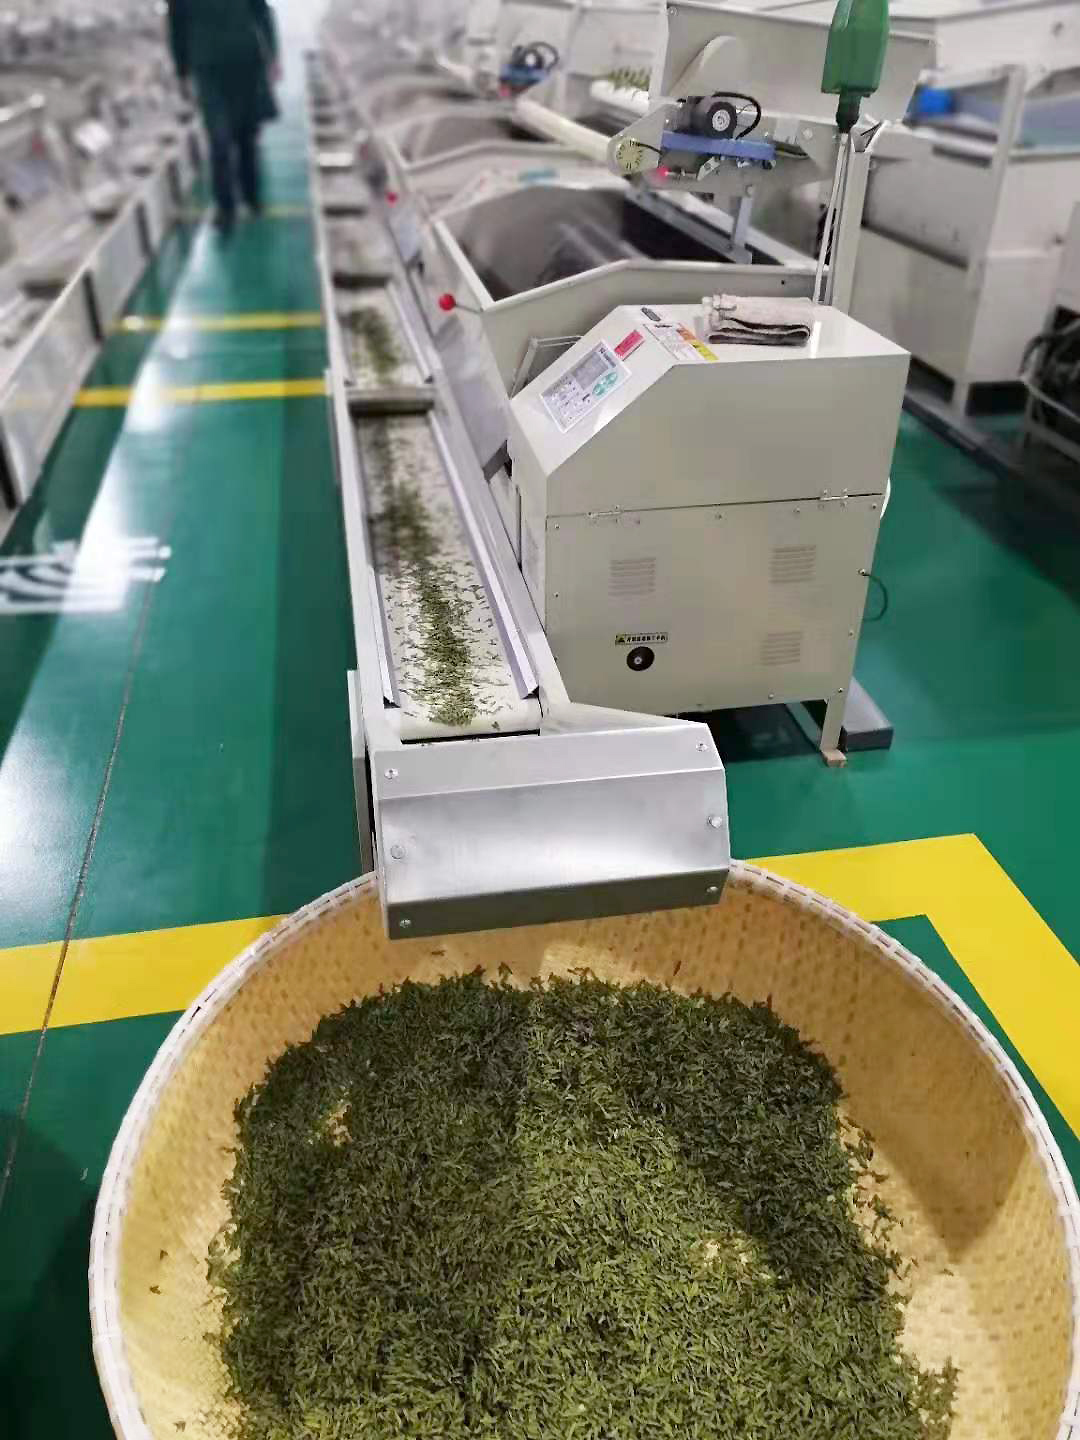 A long row of machine fryers in a sparkling tea processing room, being carried down a long thin conveyor and pouring into a large woven bamboo basket on the floor.